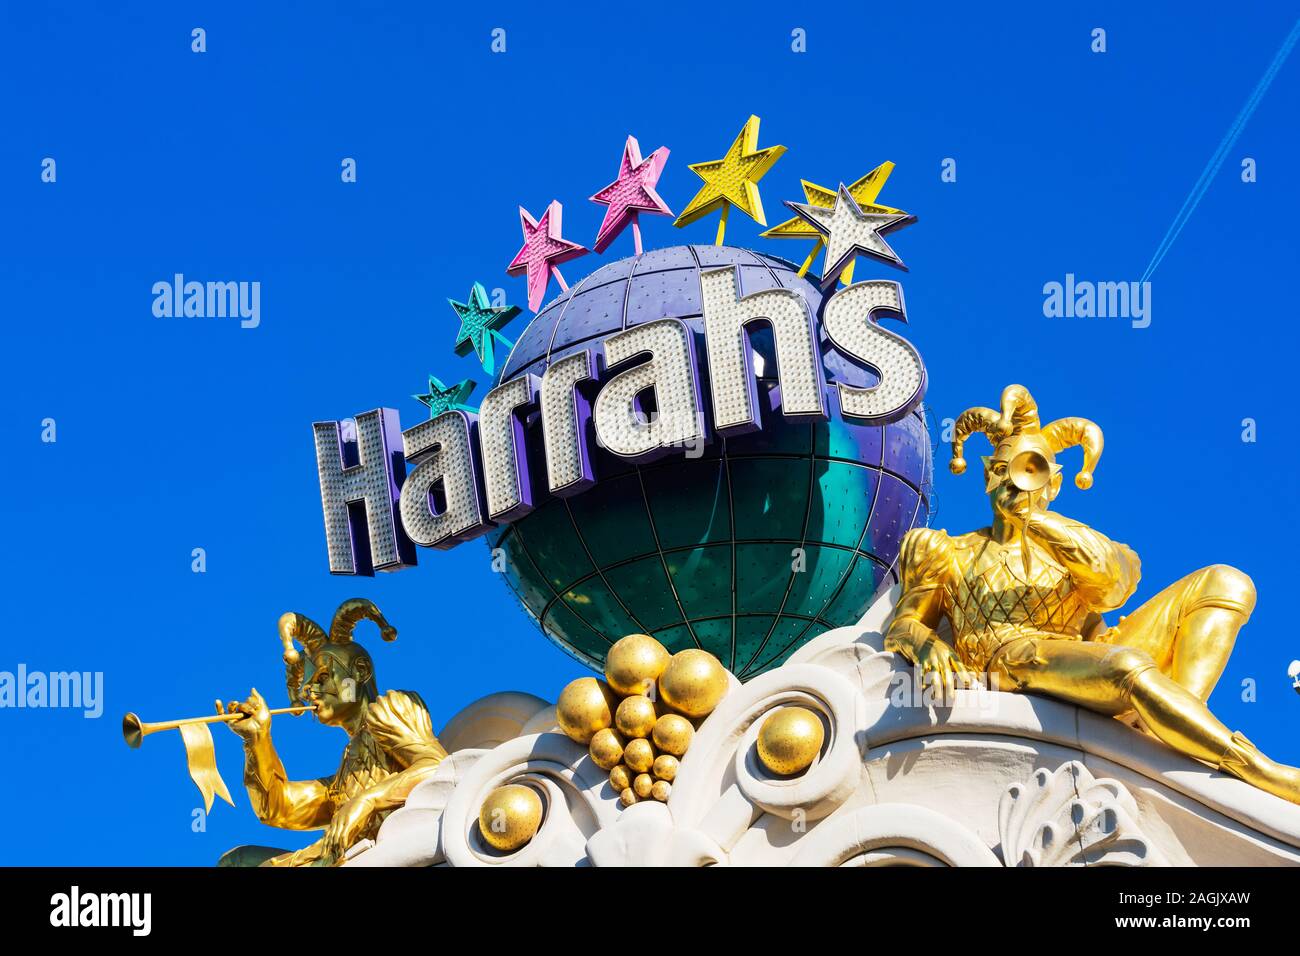 Two gilded jester, joker sculptures blow trumpets seating between globe and stars, and on outdoor marquee of Harrah's casino and hotel - Las Vegas, Ne Stock Photo